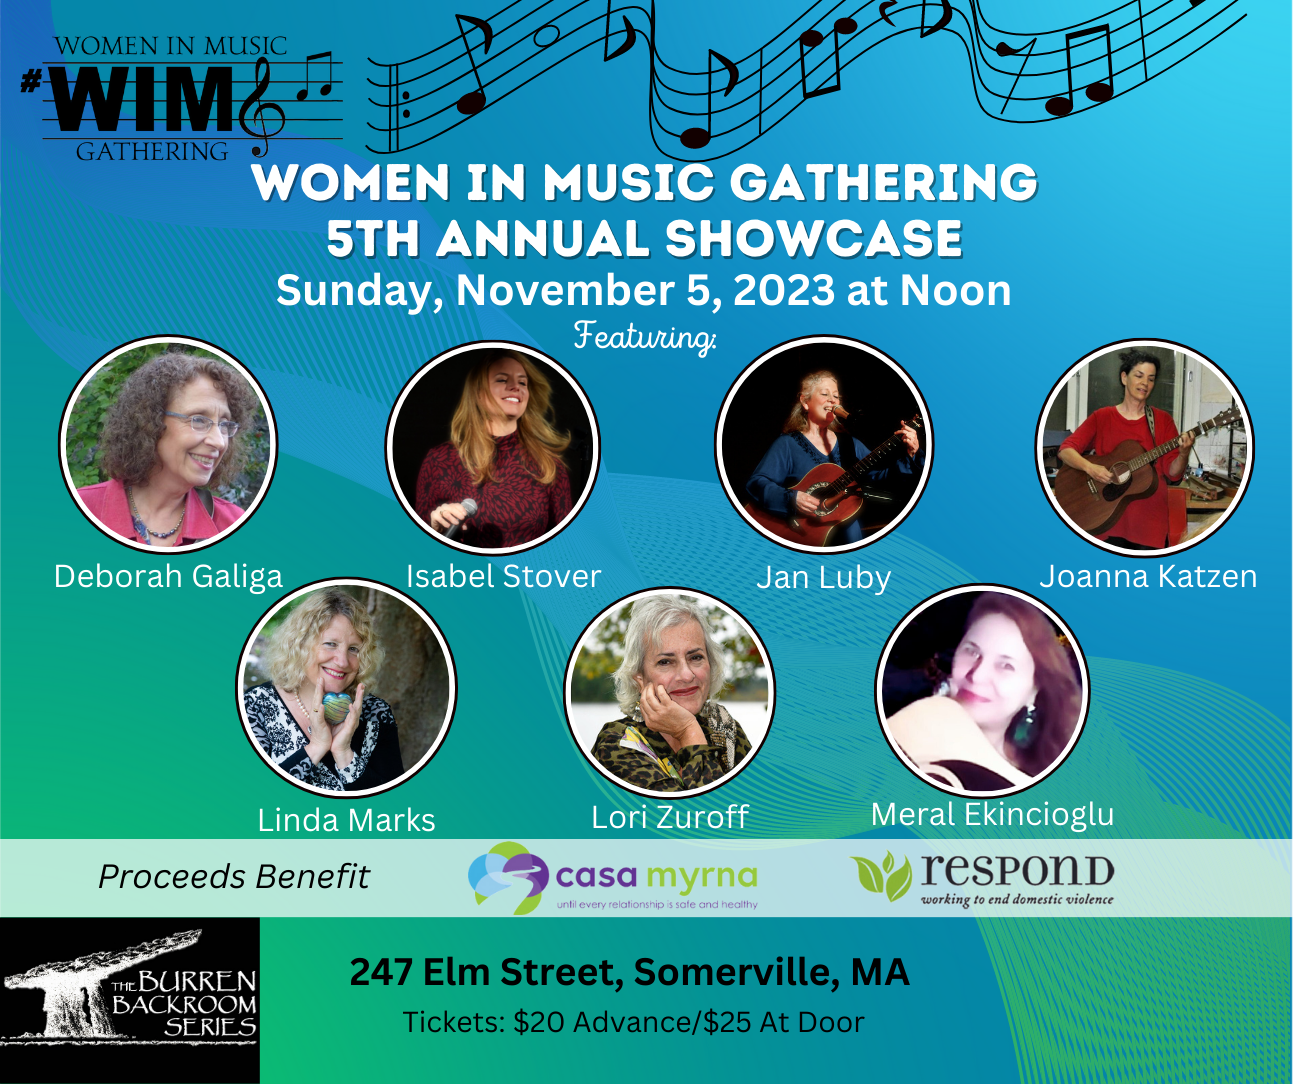 Women In Music Gathering Showcase for RESPOND and Casa Myrna